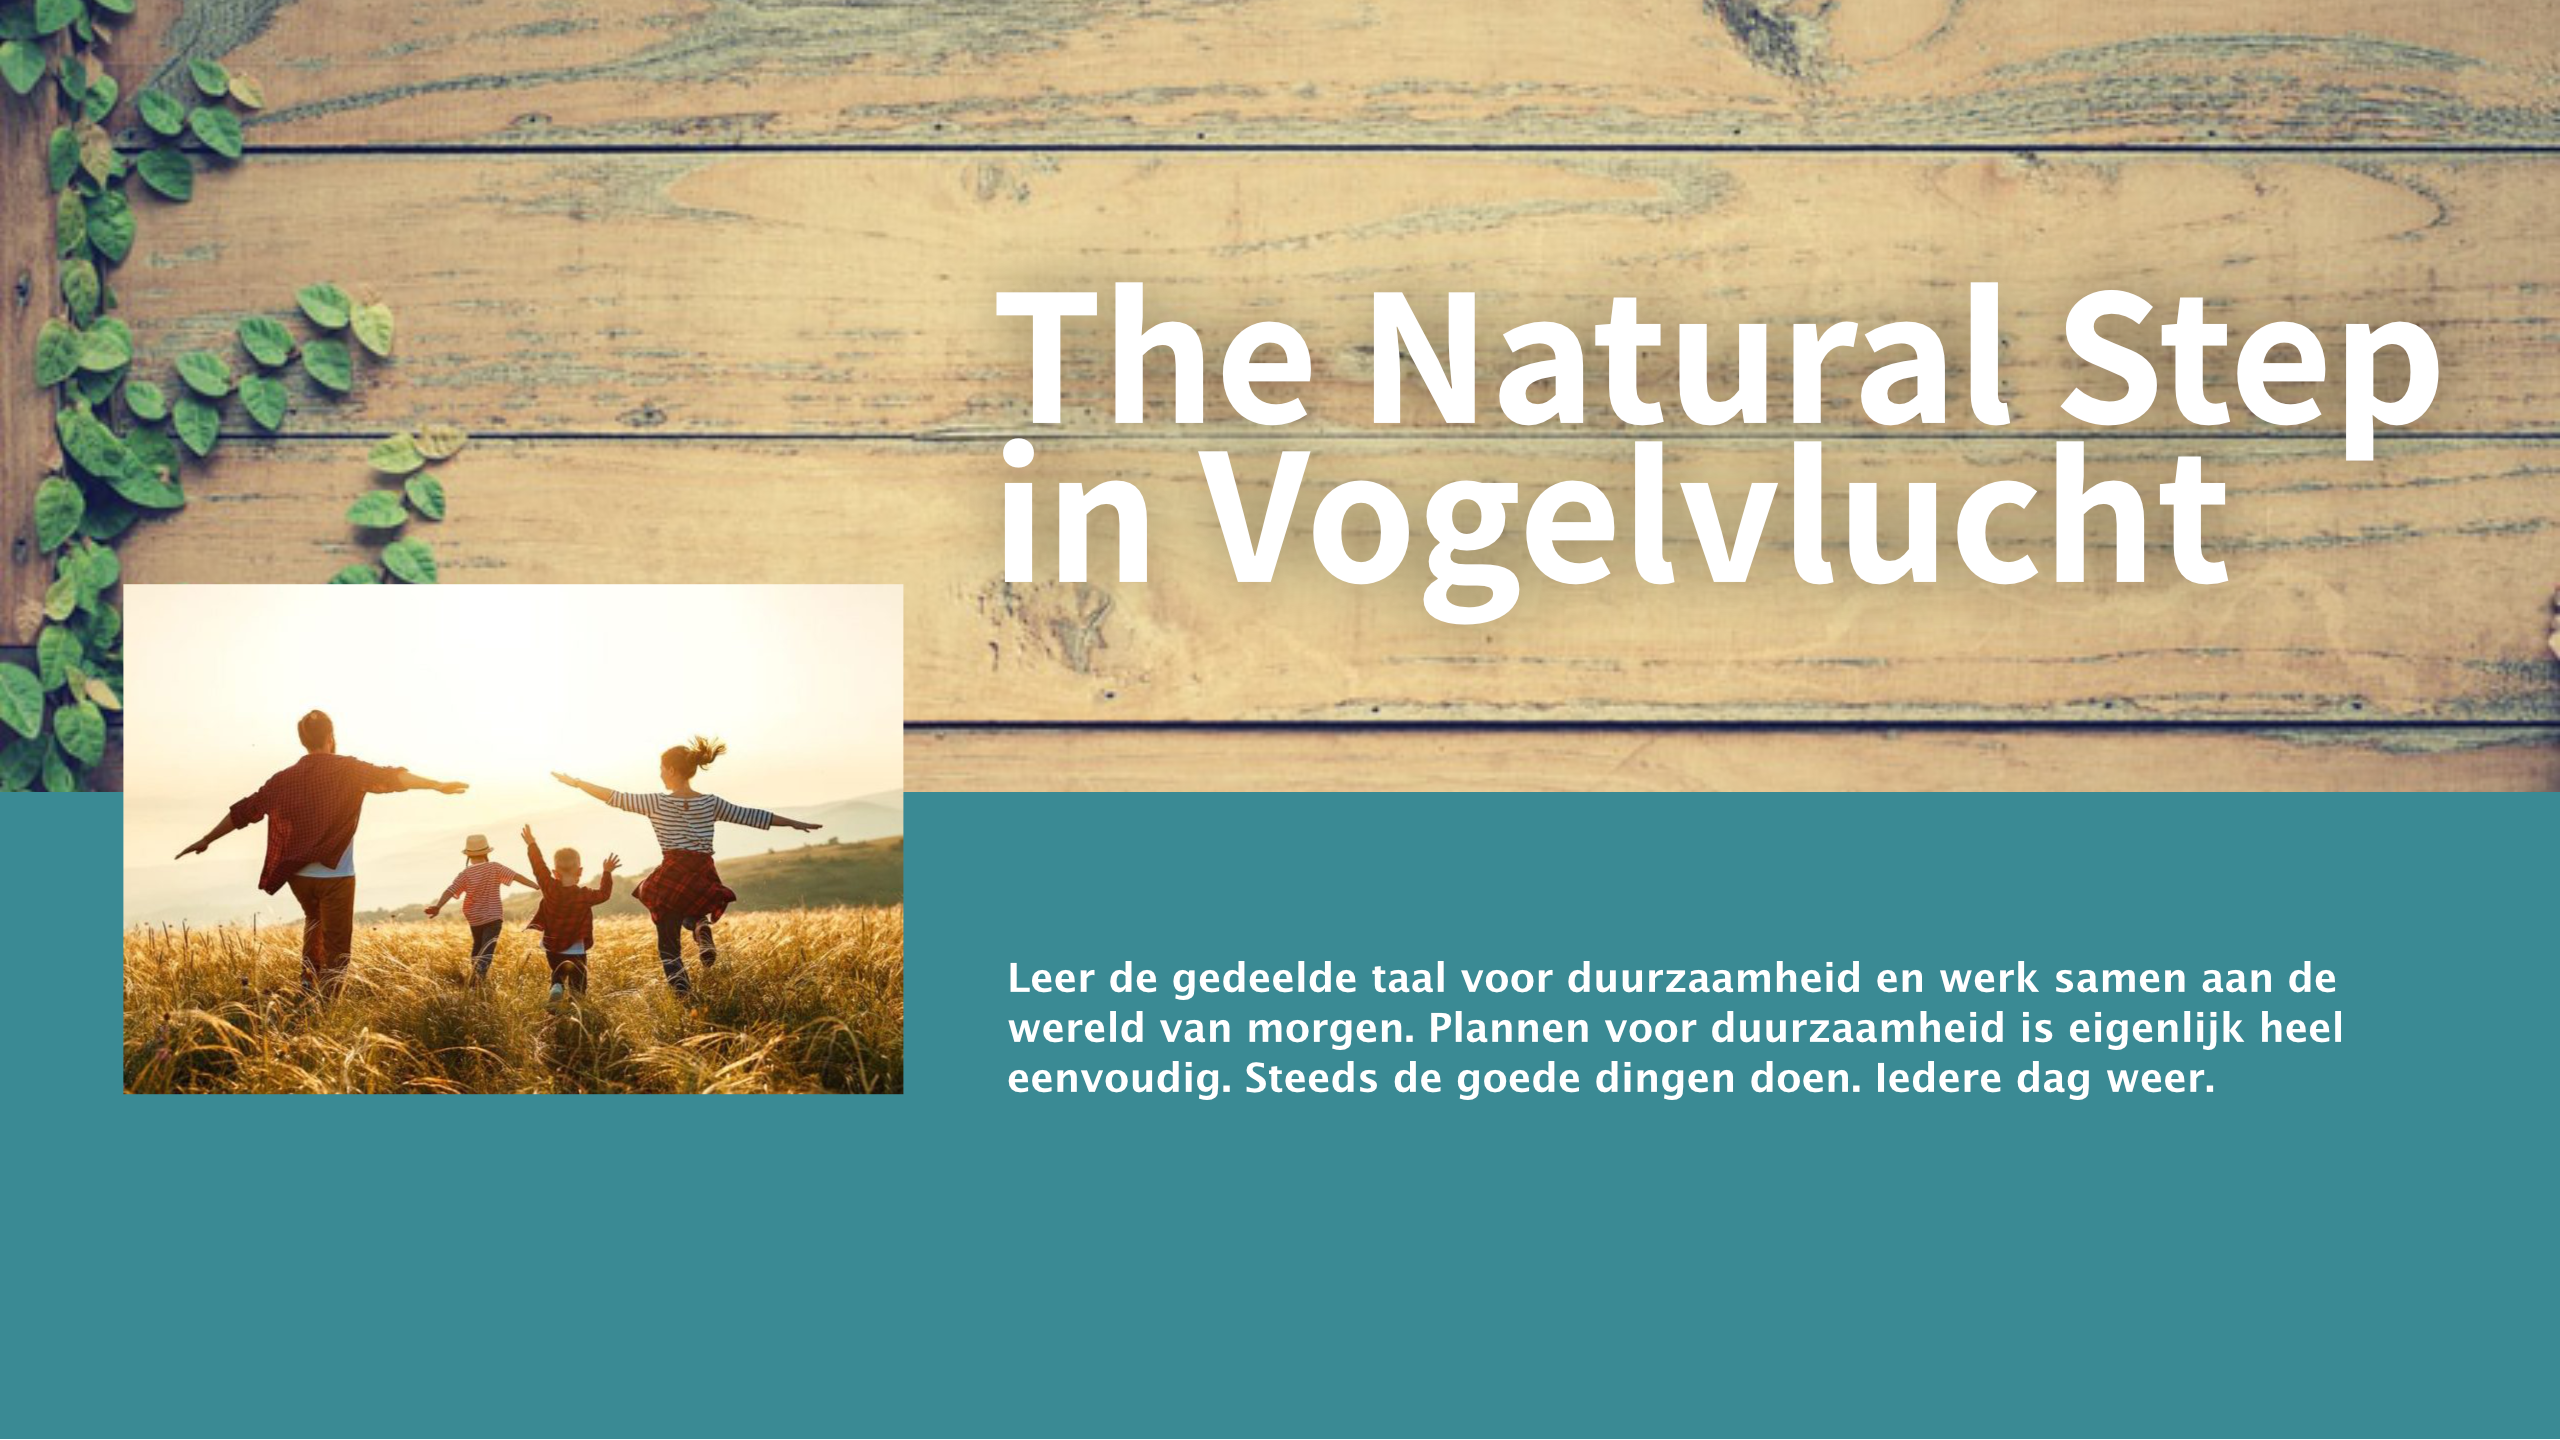 E-learning duurzaamheid Vogelvlucht The Natural Step